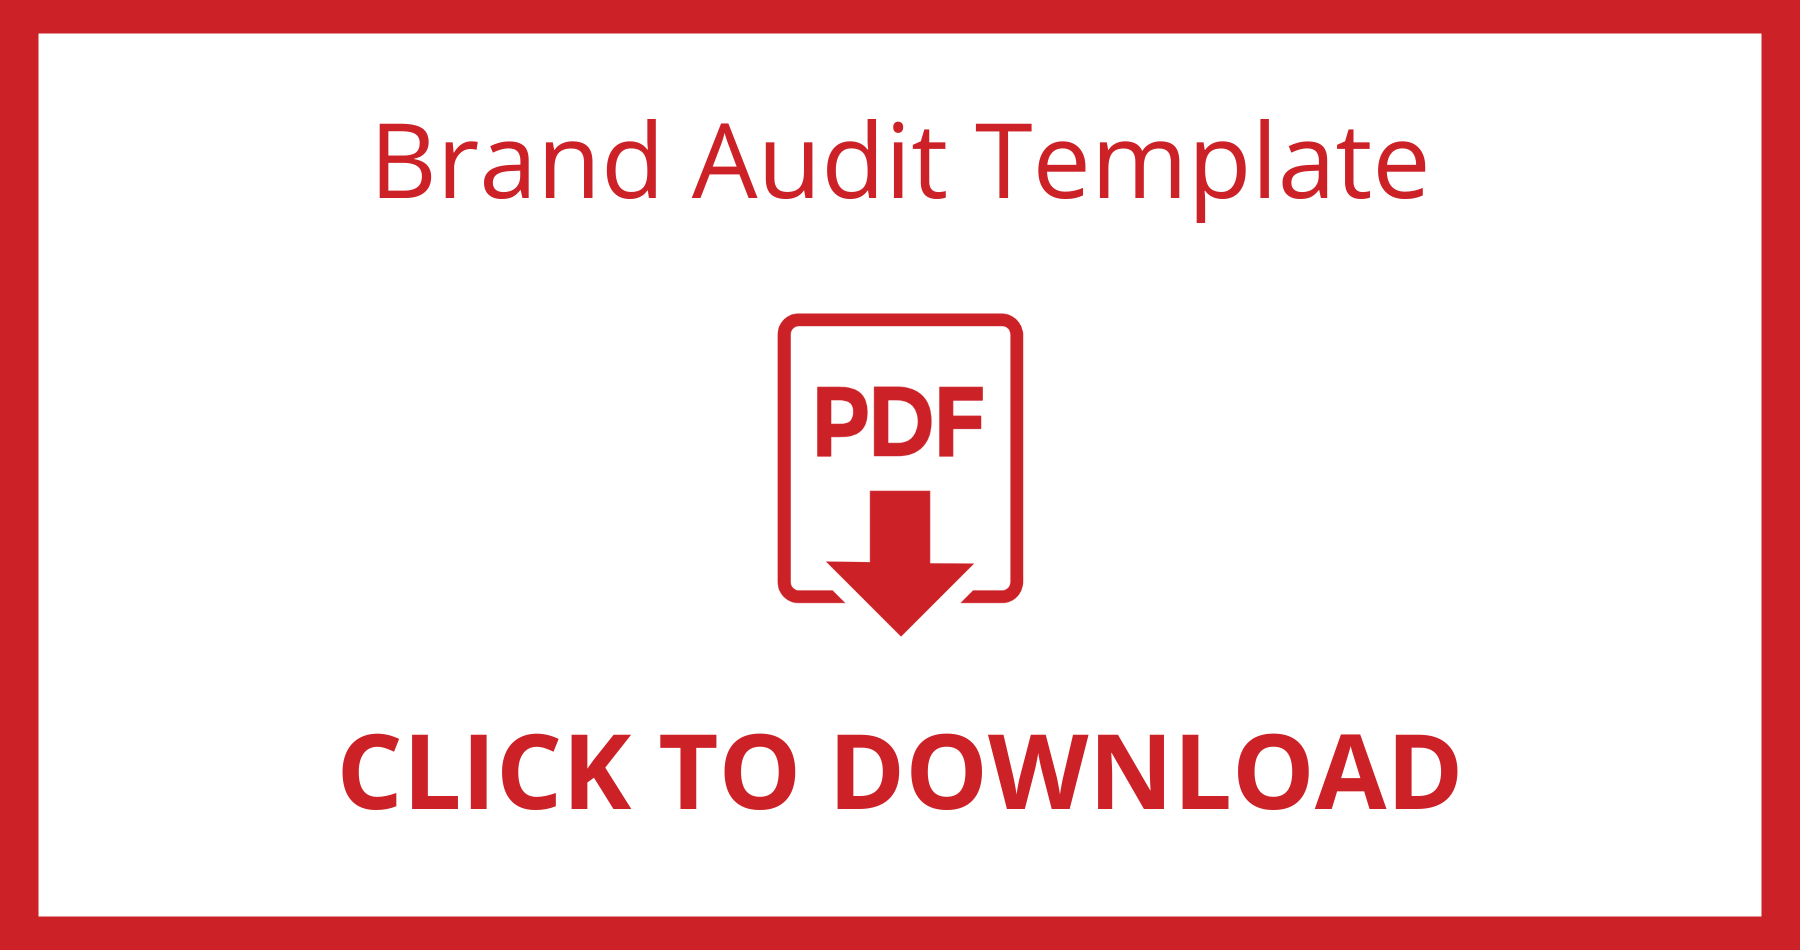 Brand audit template download